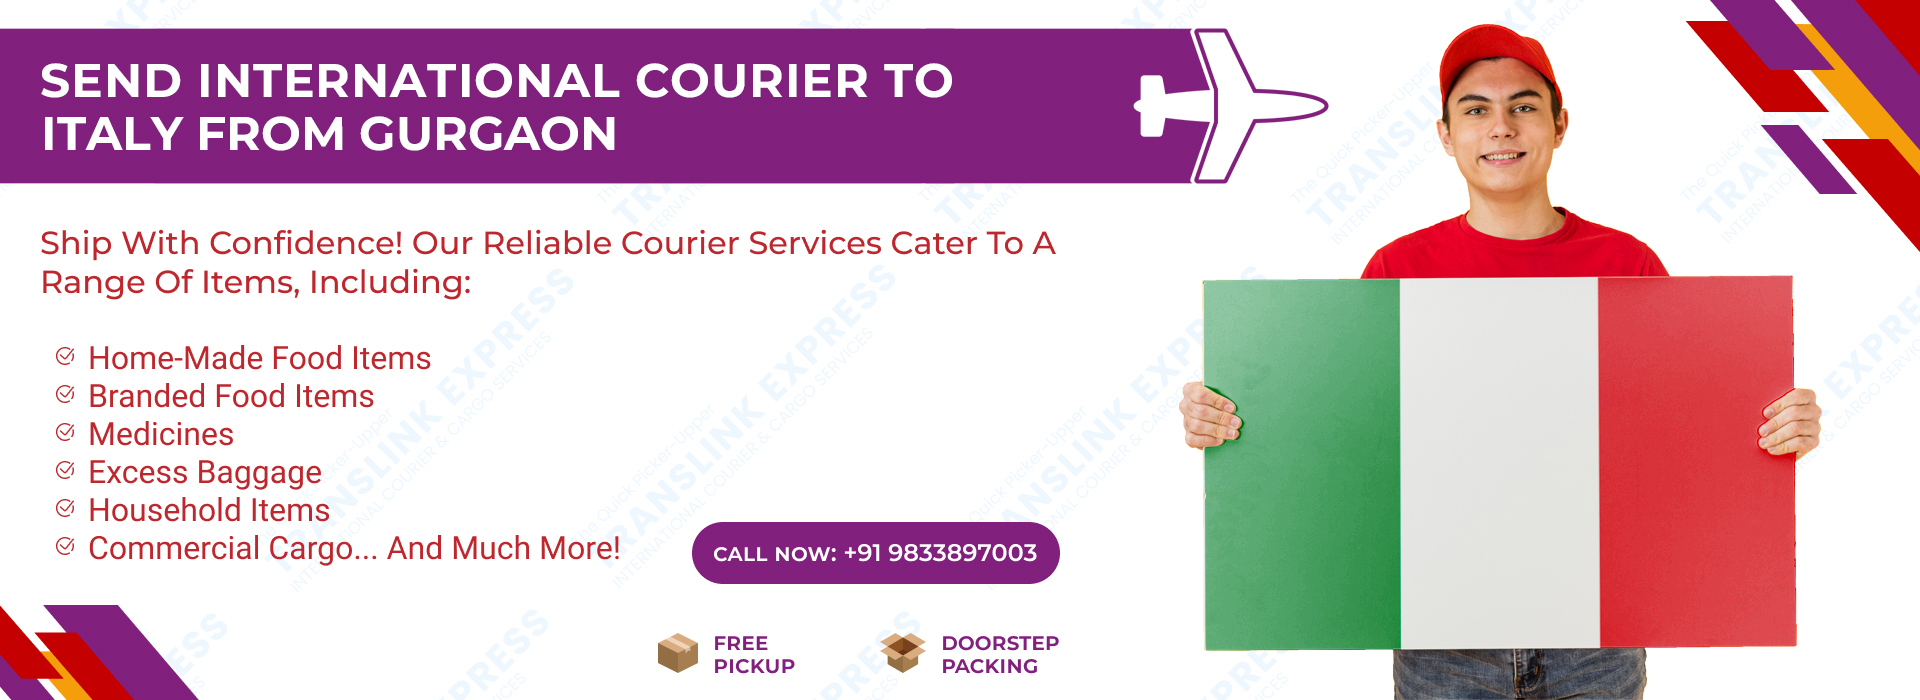 Courier to Italy From Gurgaon